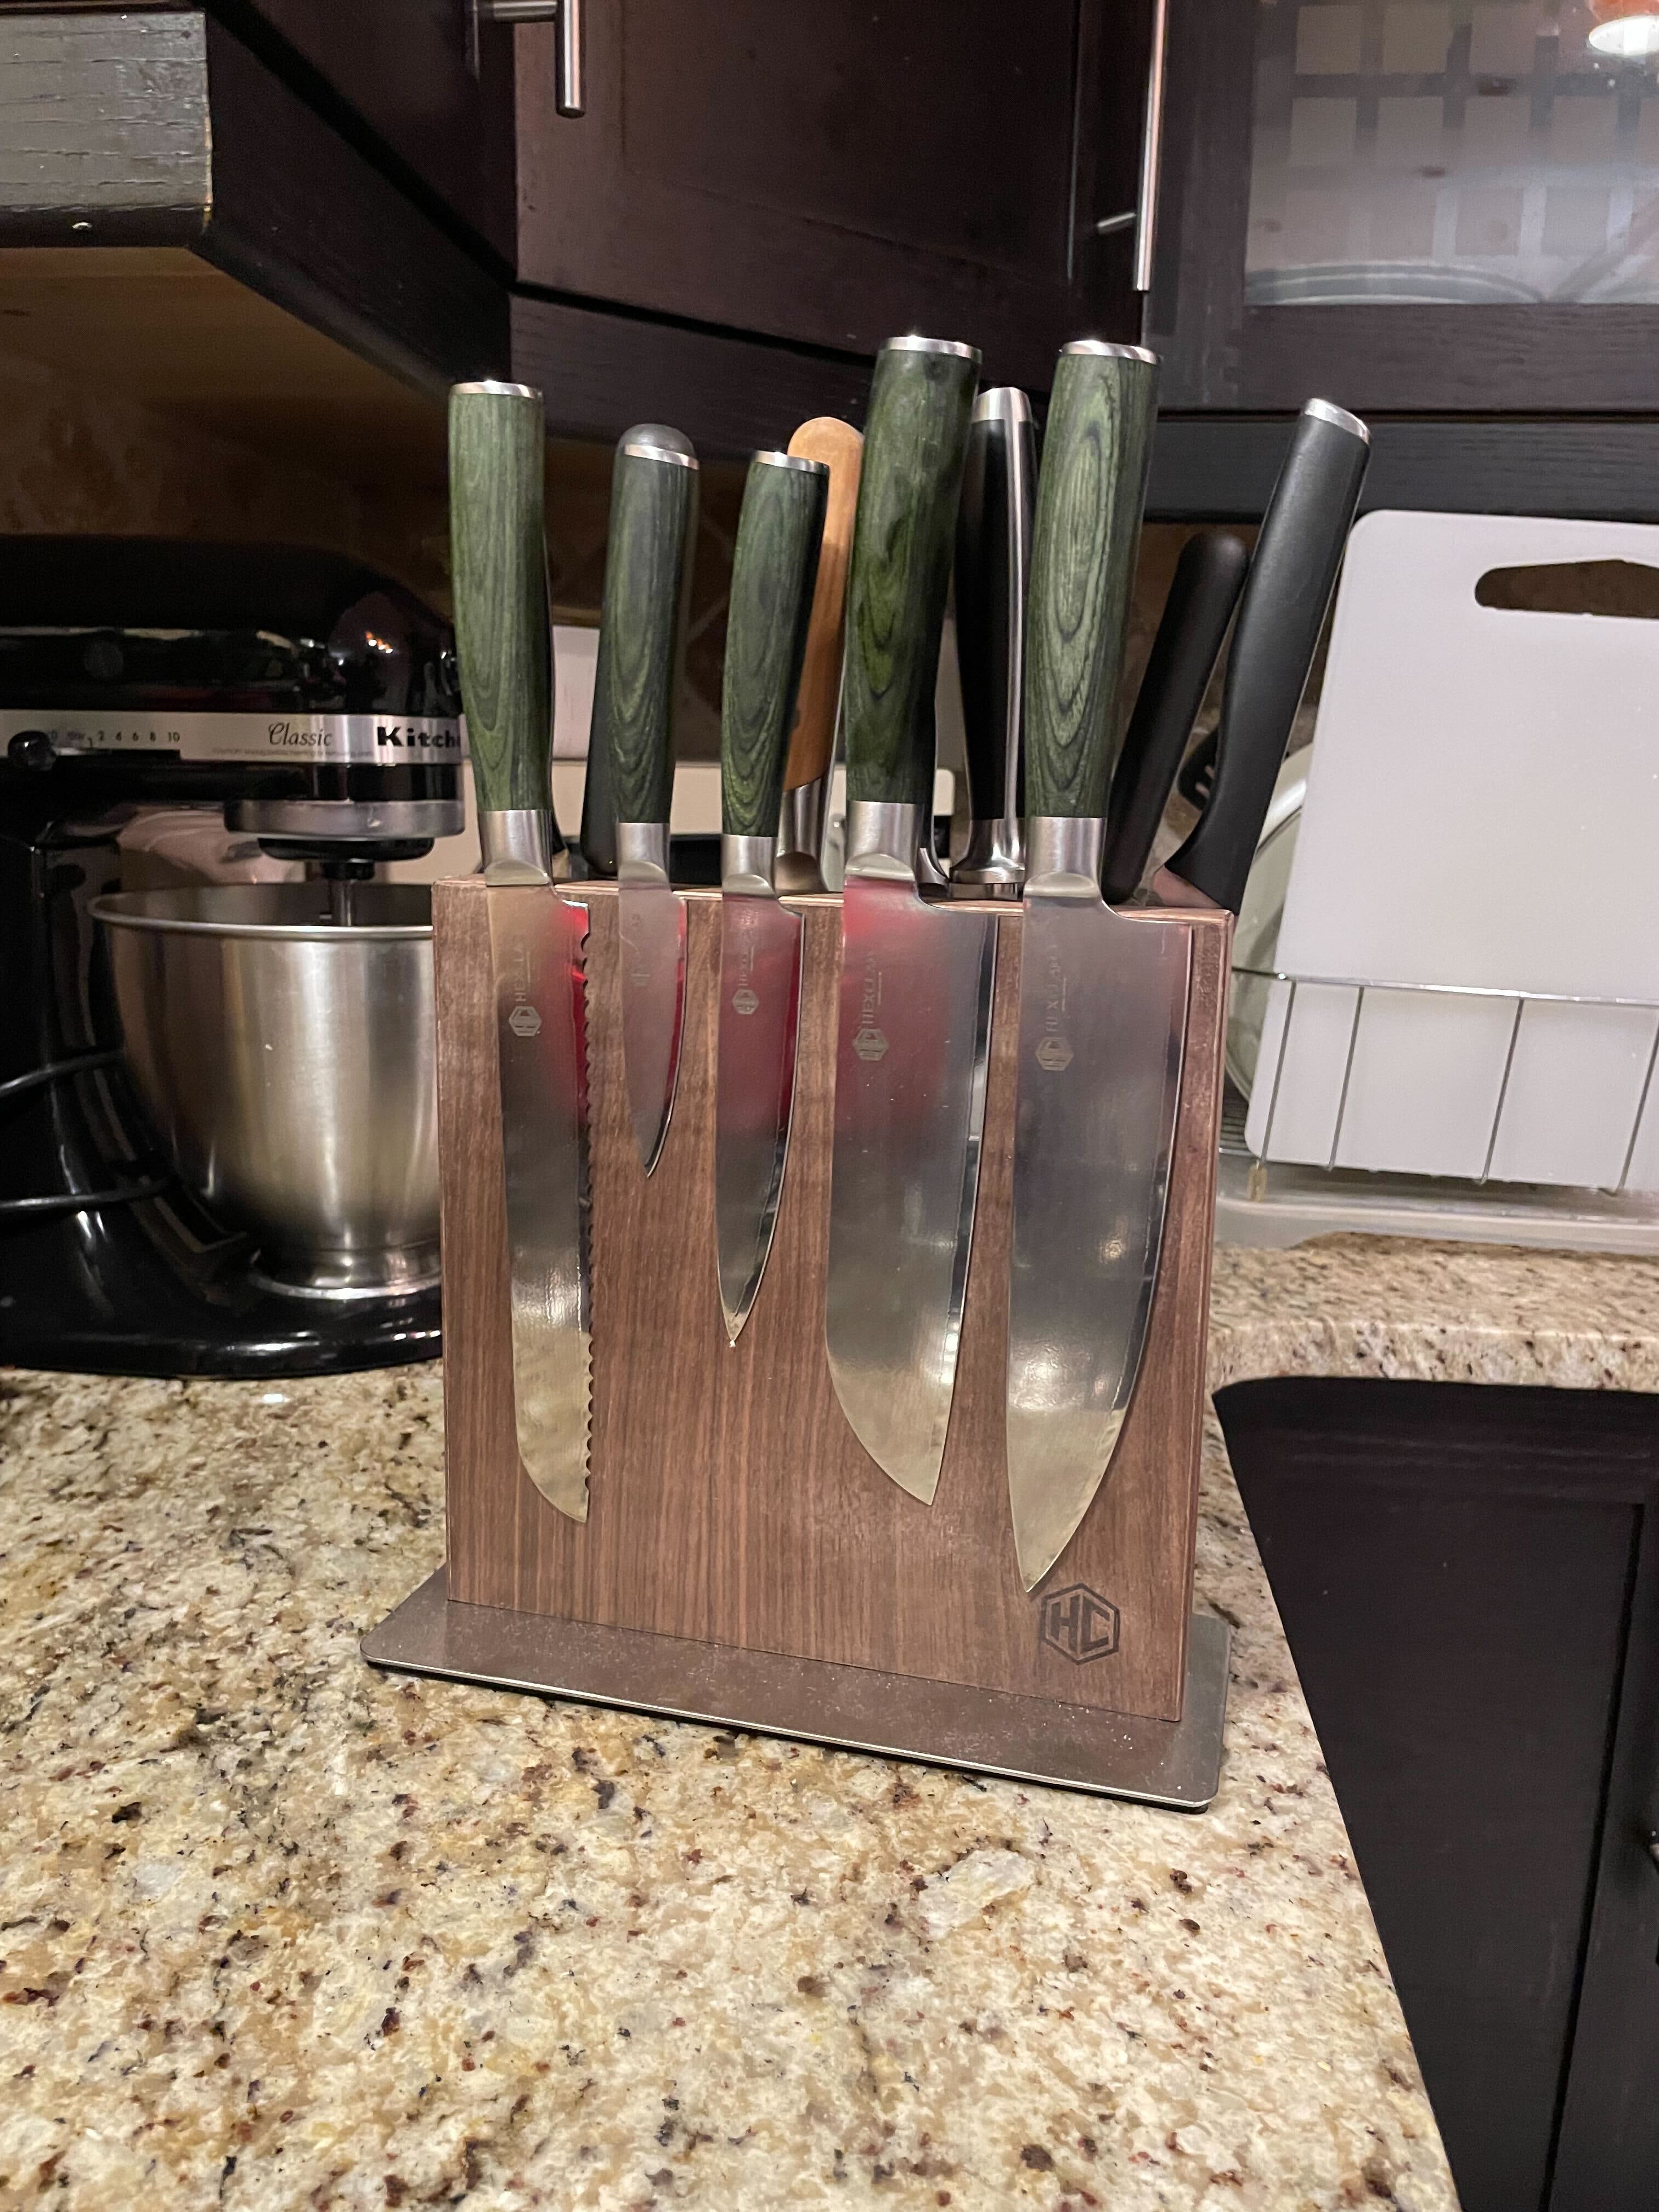 This Stunning, Space-Saving Knife Set Is My New Favorite Kitchen Gear